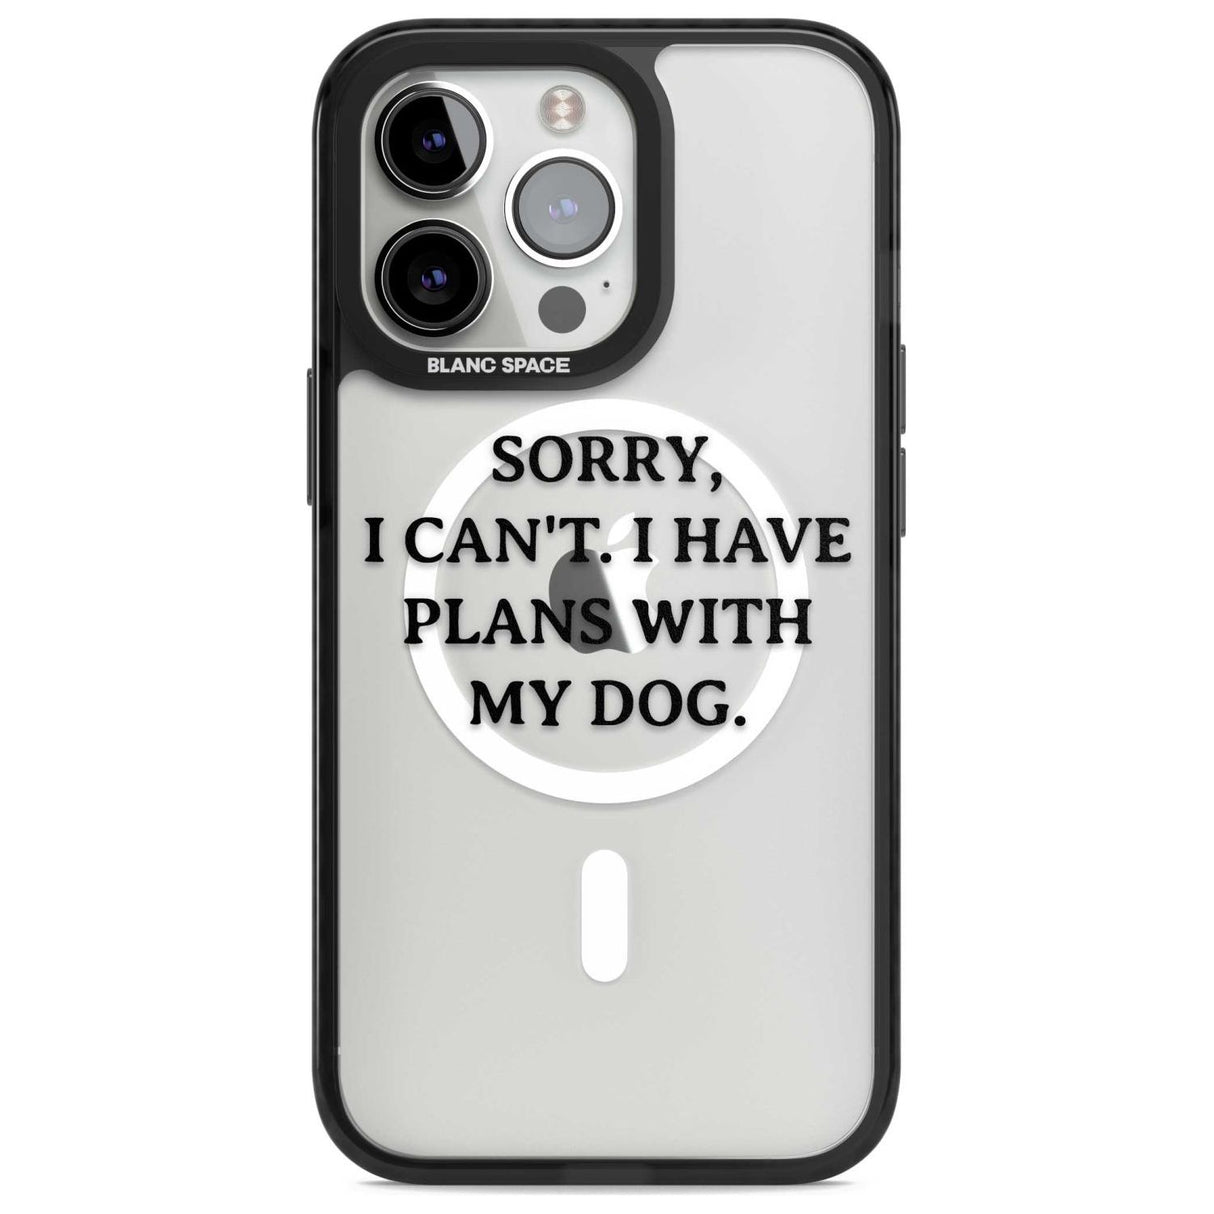 I Have Plans With My Dog Phone Case iPhone 15 Pro Max / Magsafe Black Impact Case,iPhone 15 Pro / Magsafe Black Impact Case,iPhone 14 Pro Max / Magsafe Black Impact Case,iPhone 14 Pro / Magsafe Black Impact Case,iPhone 13 Pro / Magsafe Black Impact Case Blanc Space